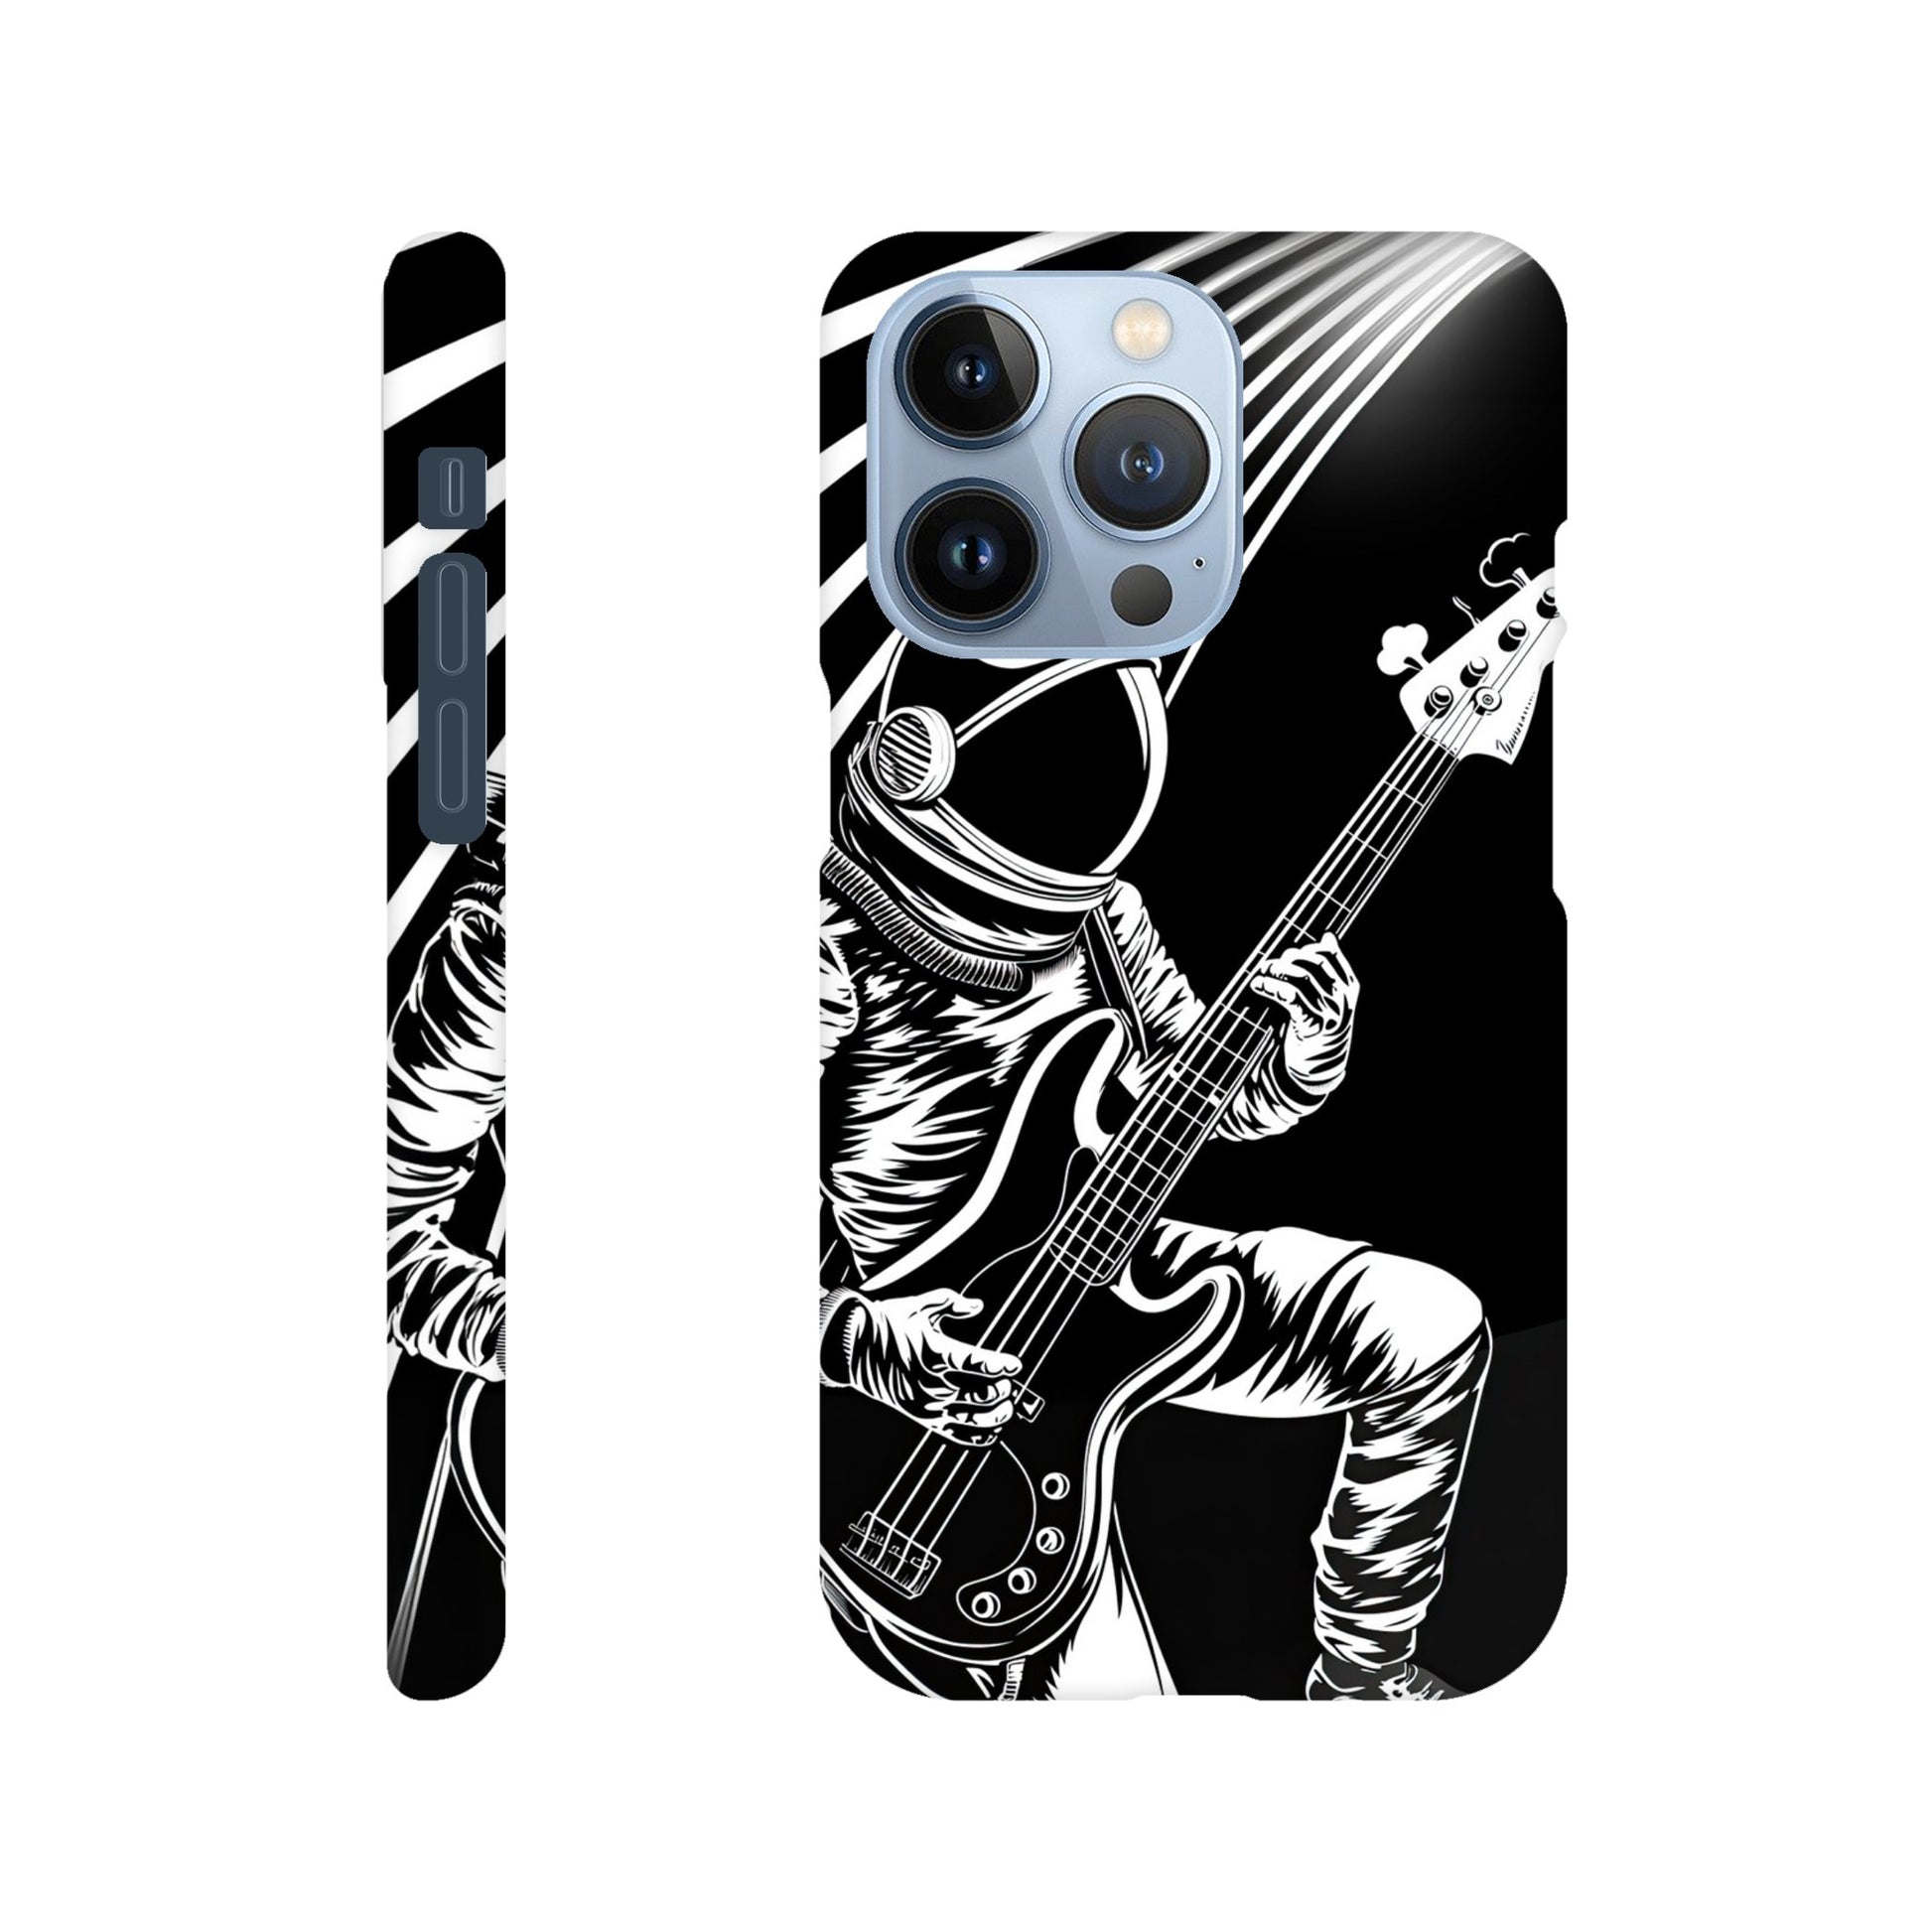 phone case with bass playing spaceman design